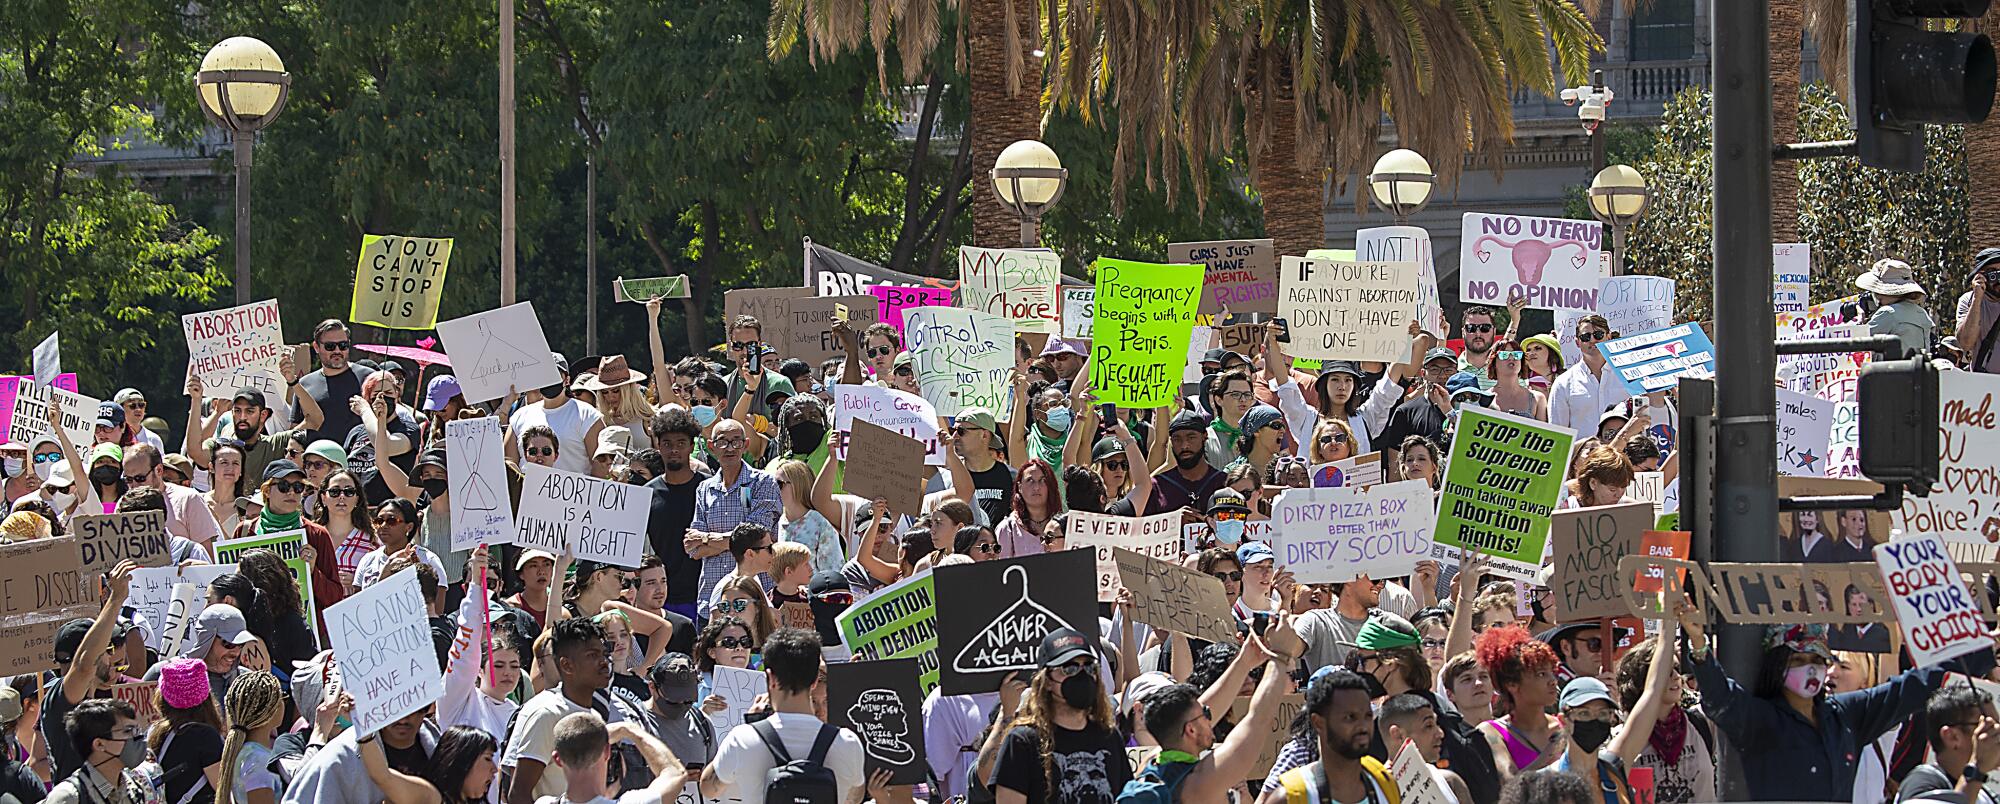 A crowd of protesters holds signs